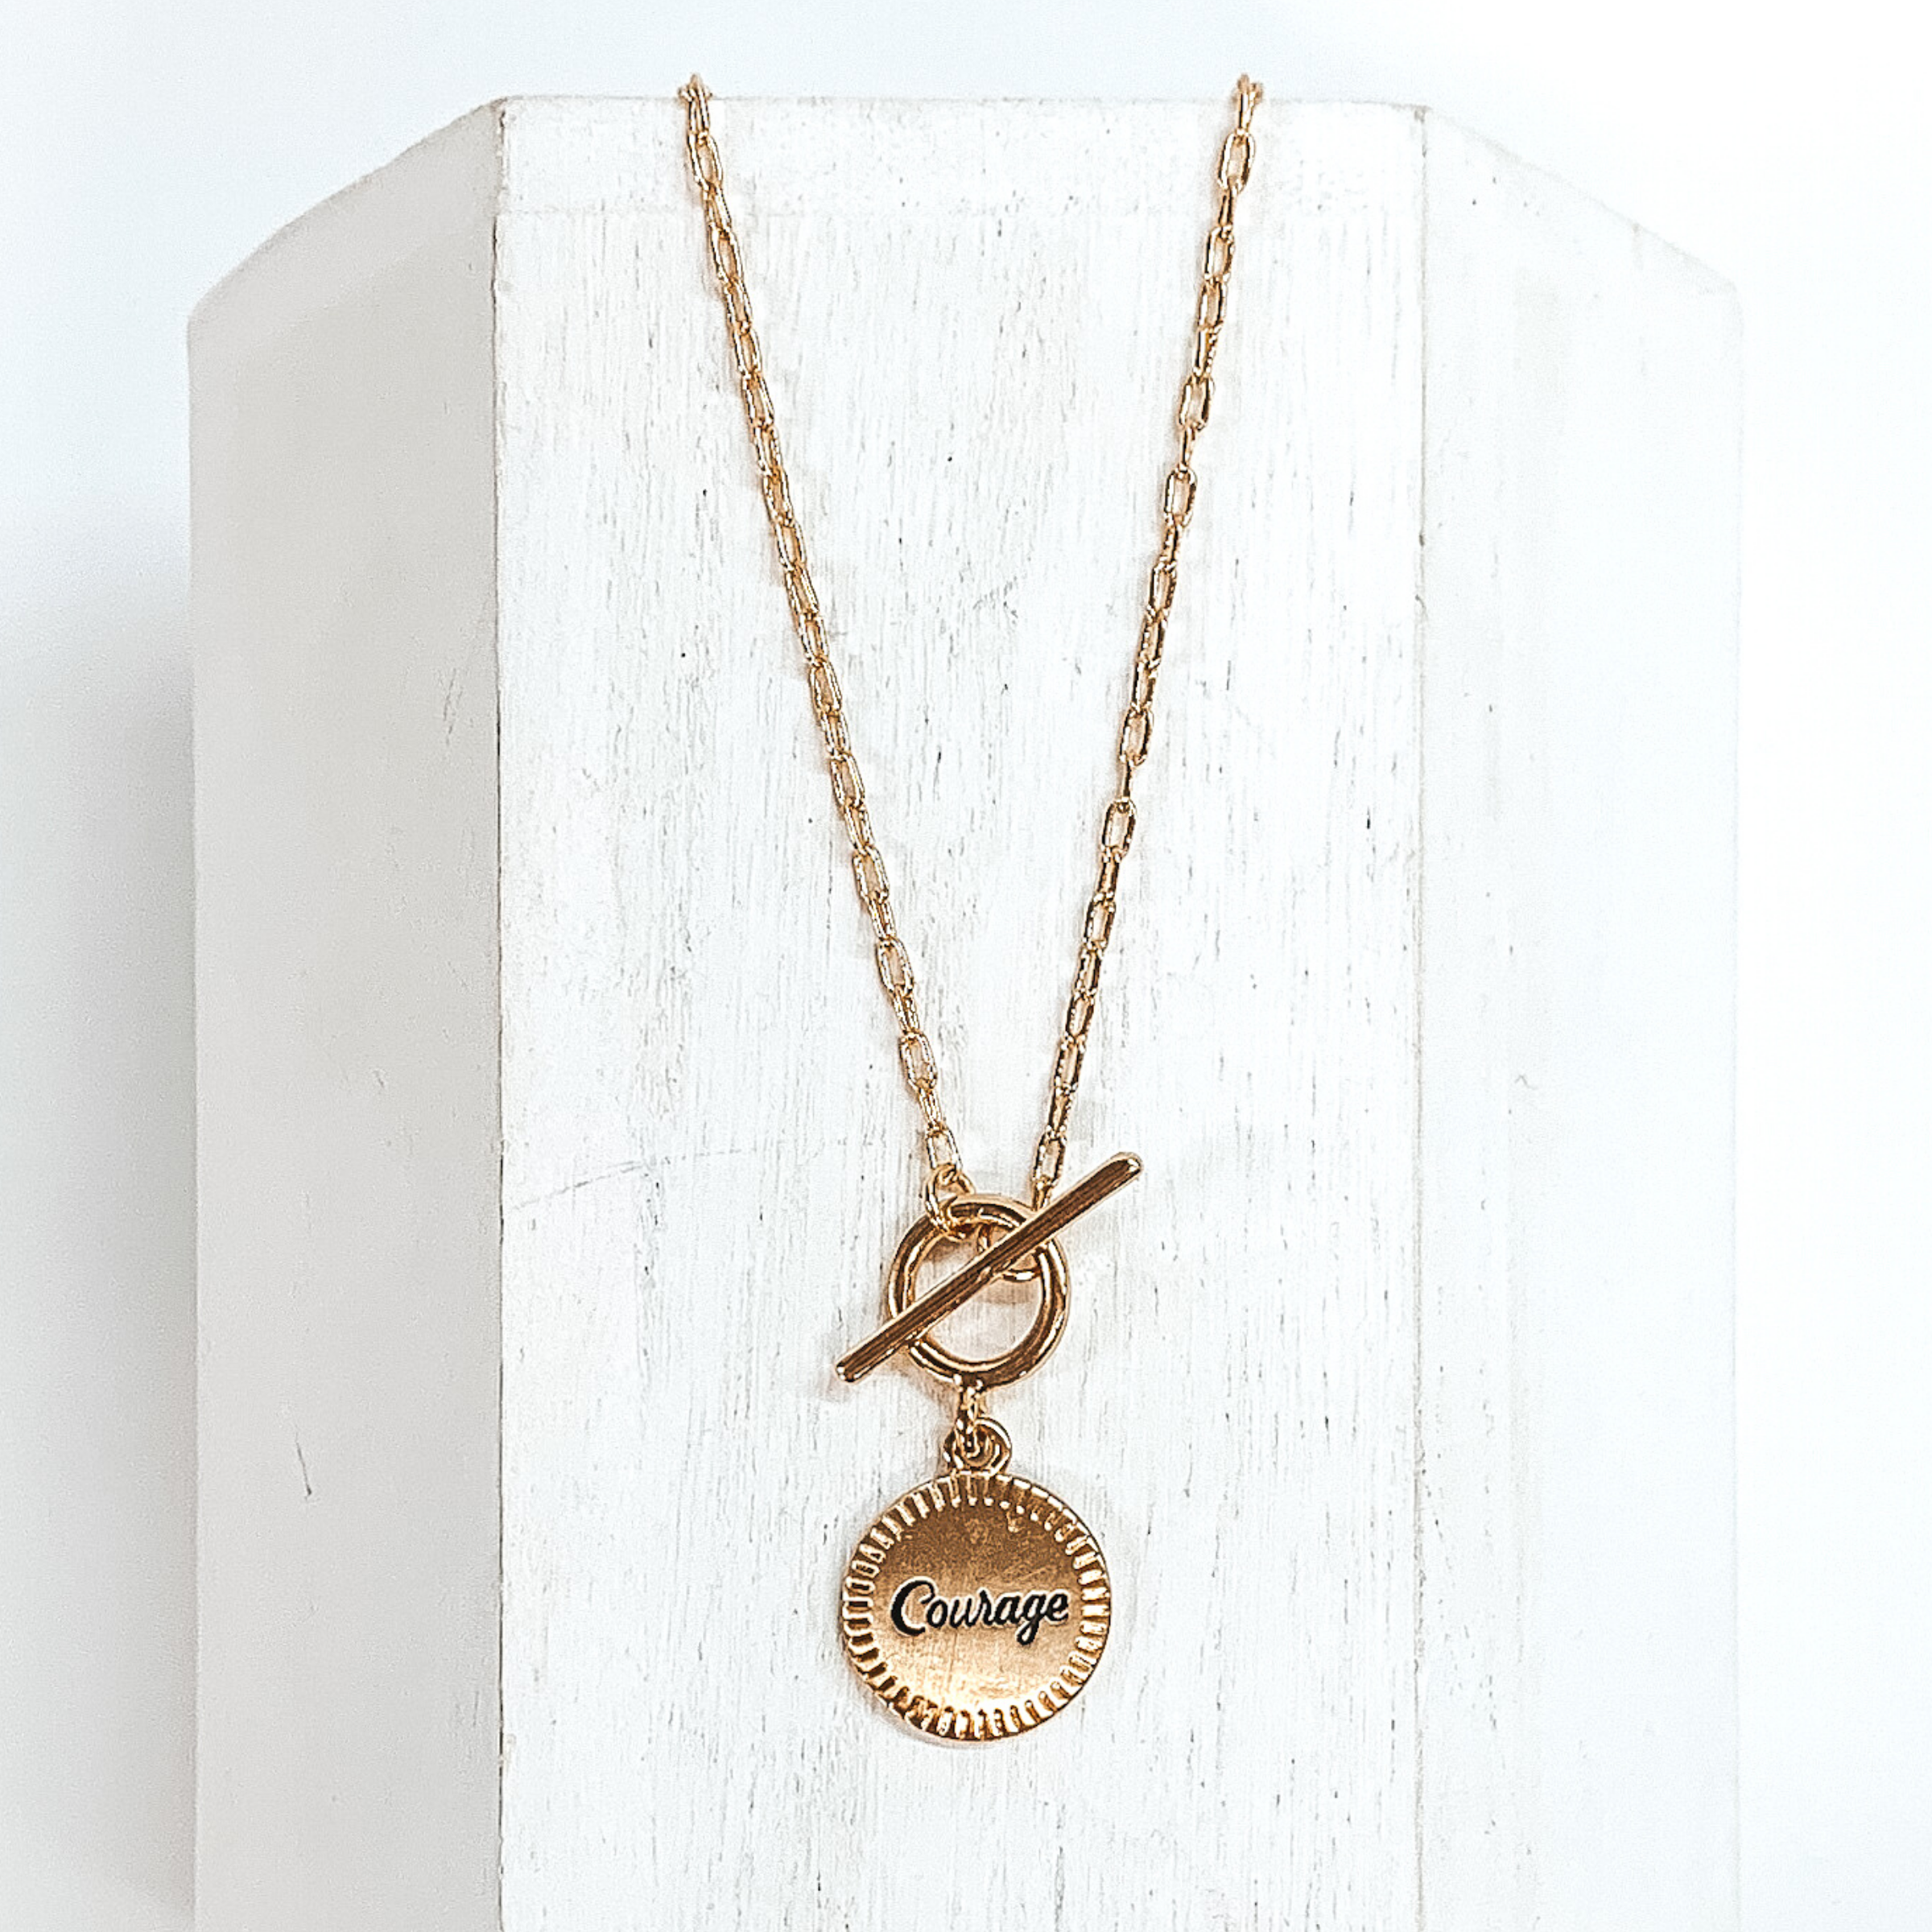 This is a gold chained necklace with a front toggle clasp that has a hanging circle pendant. In the center of the pendant the word "Courage" is engraved in cursive. This necklace is pictured laying on a white block on a white background.